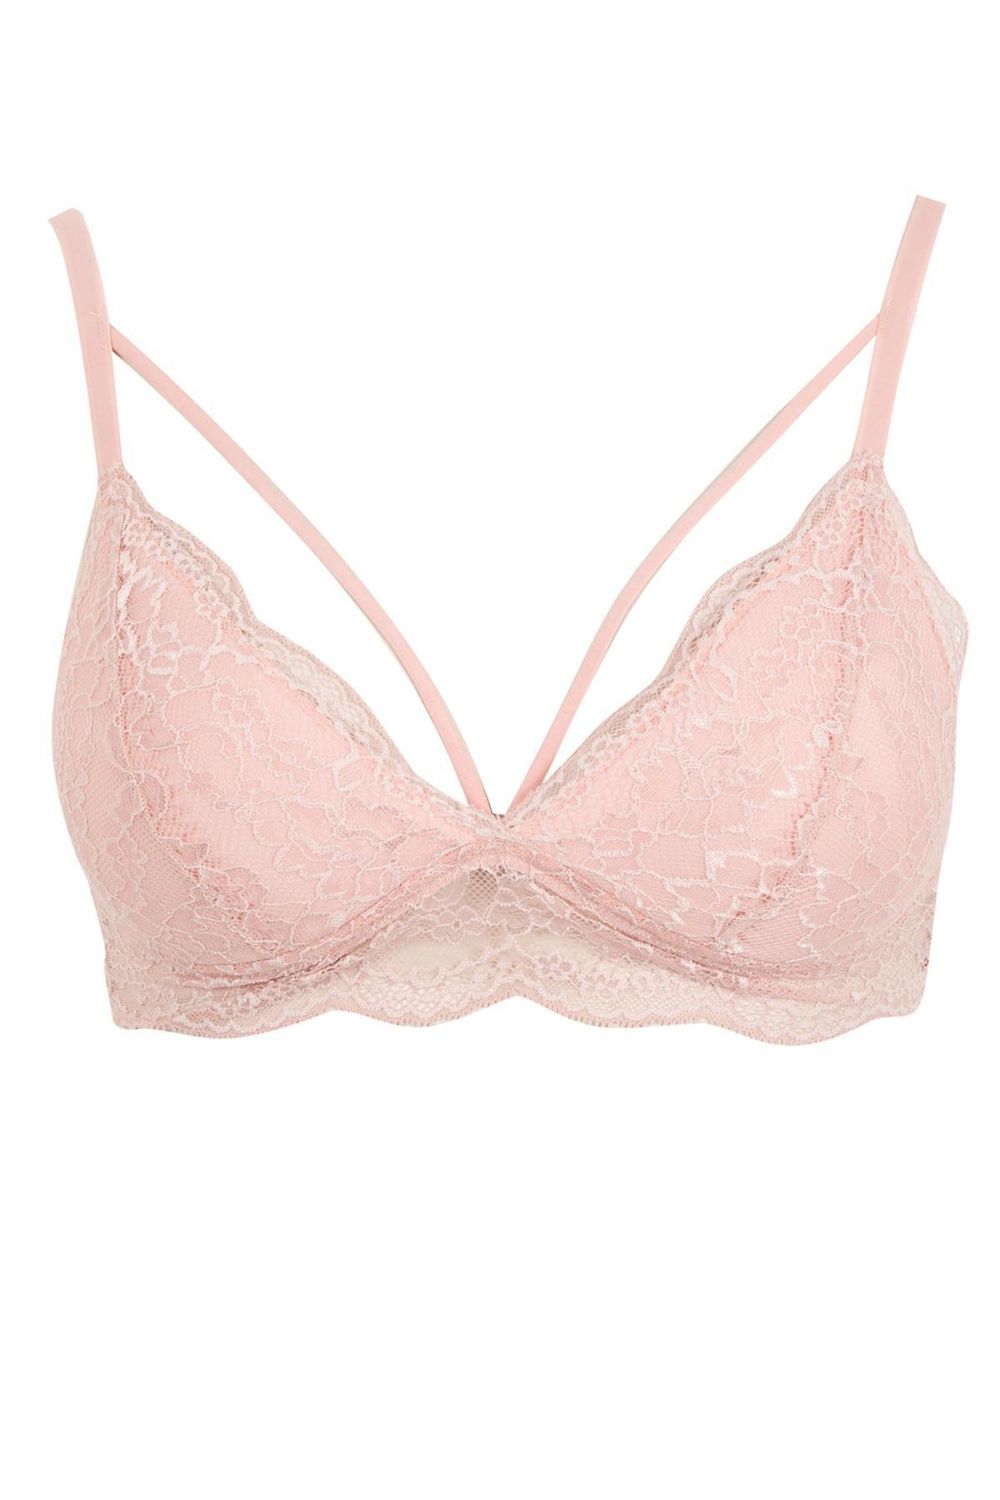 Sexy Bralet Padded Bra, Push Lace Bralette, Lace Underclothes